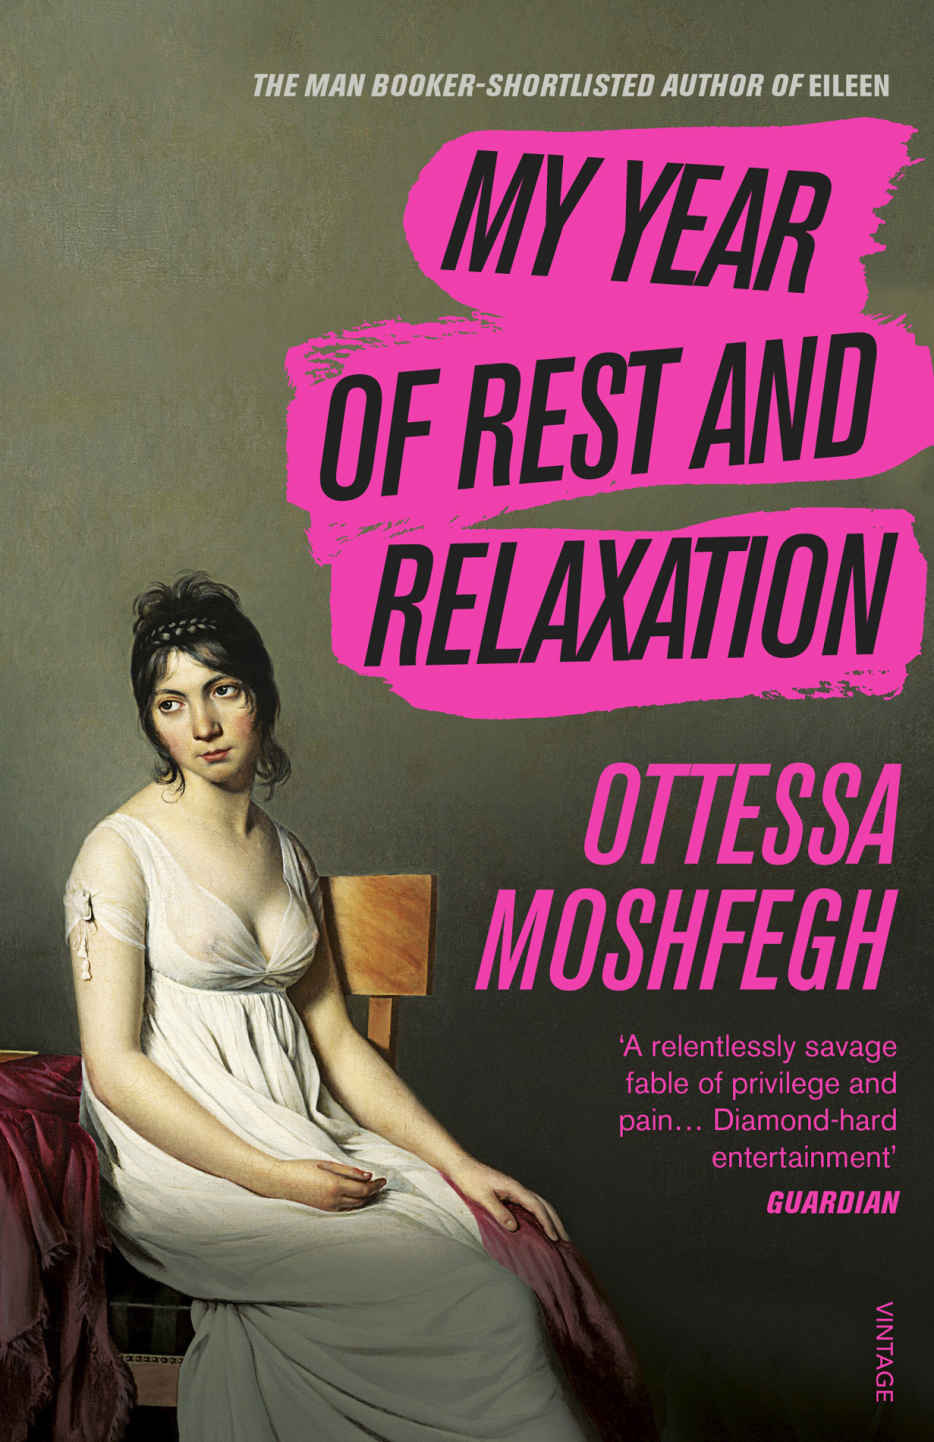 Social capital: Moshfegh’s bestselling novel and status symbol ‘My Year of Rest and Relaxation’